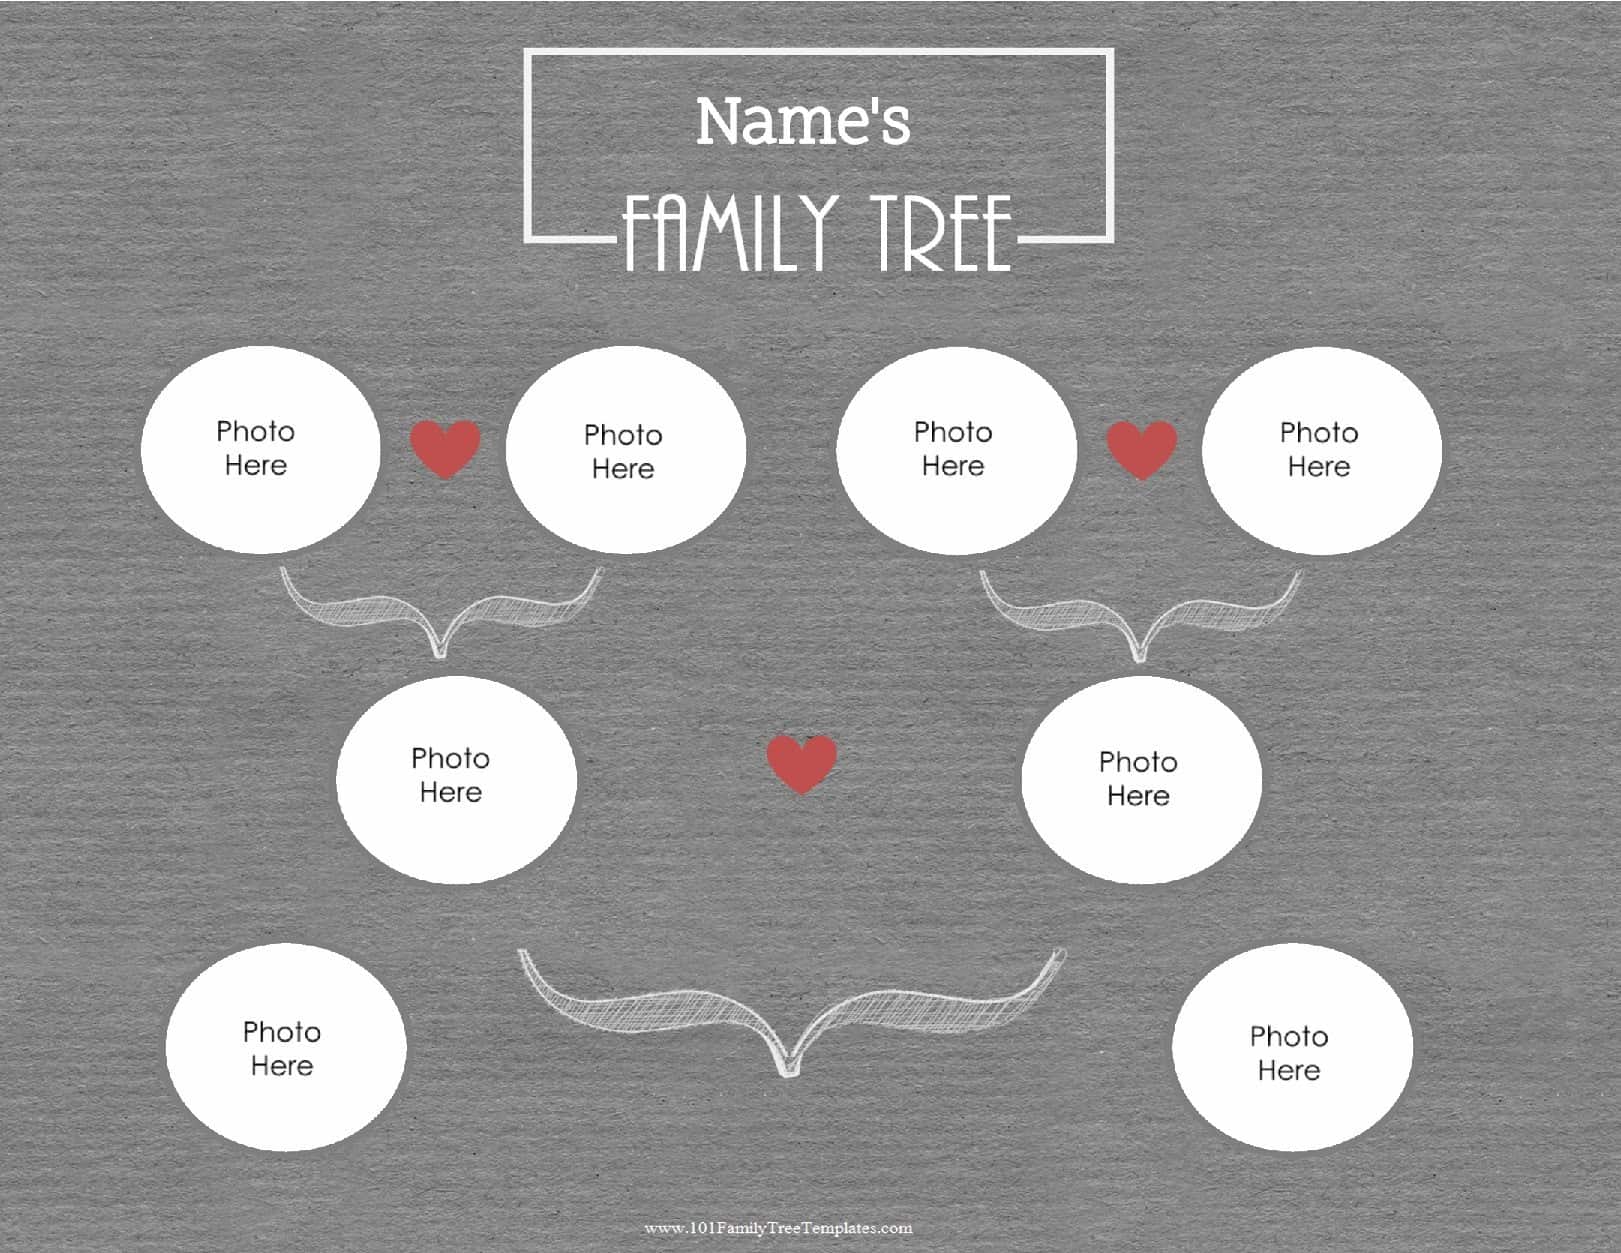 Free Family Tree Poster  Customize Online then Print at Home Within Blank Family Tree Template 3 Generations